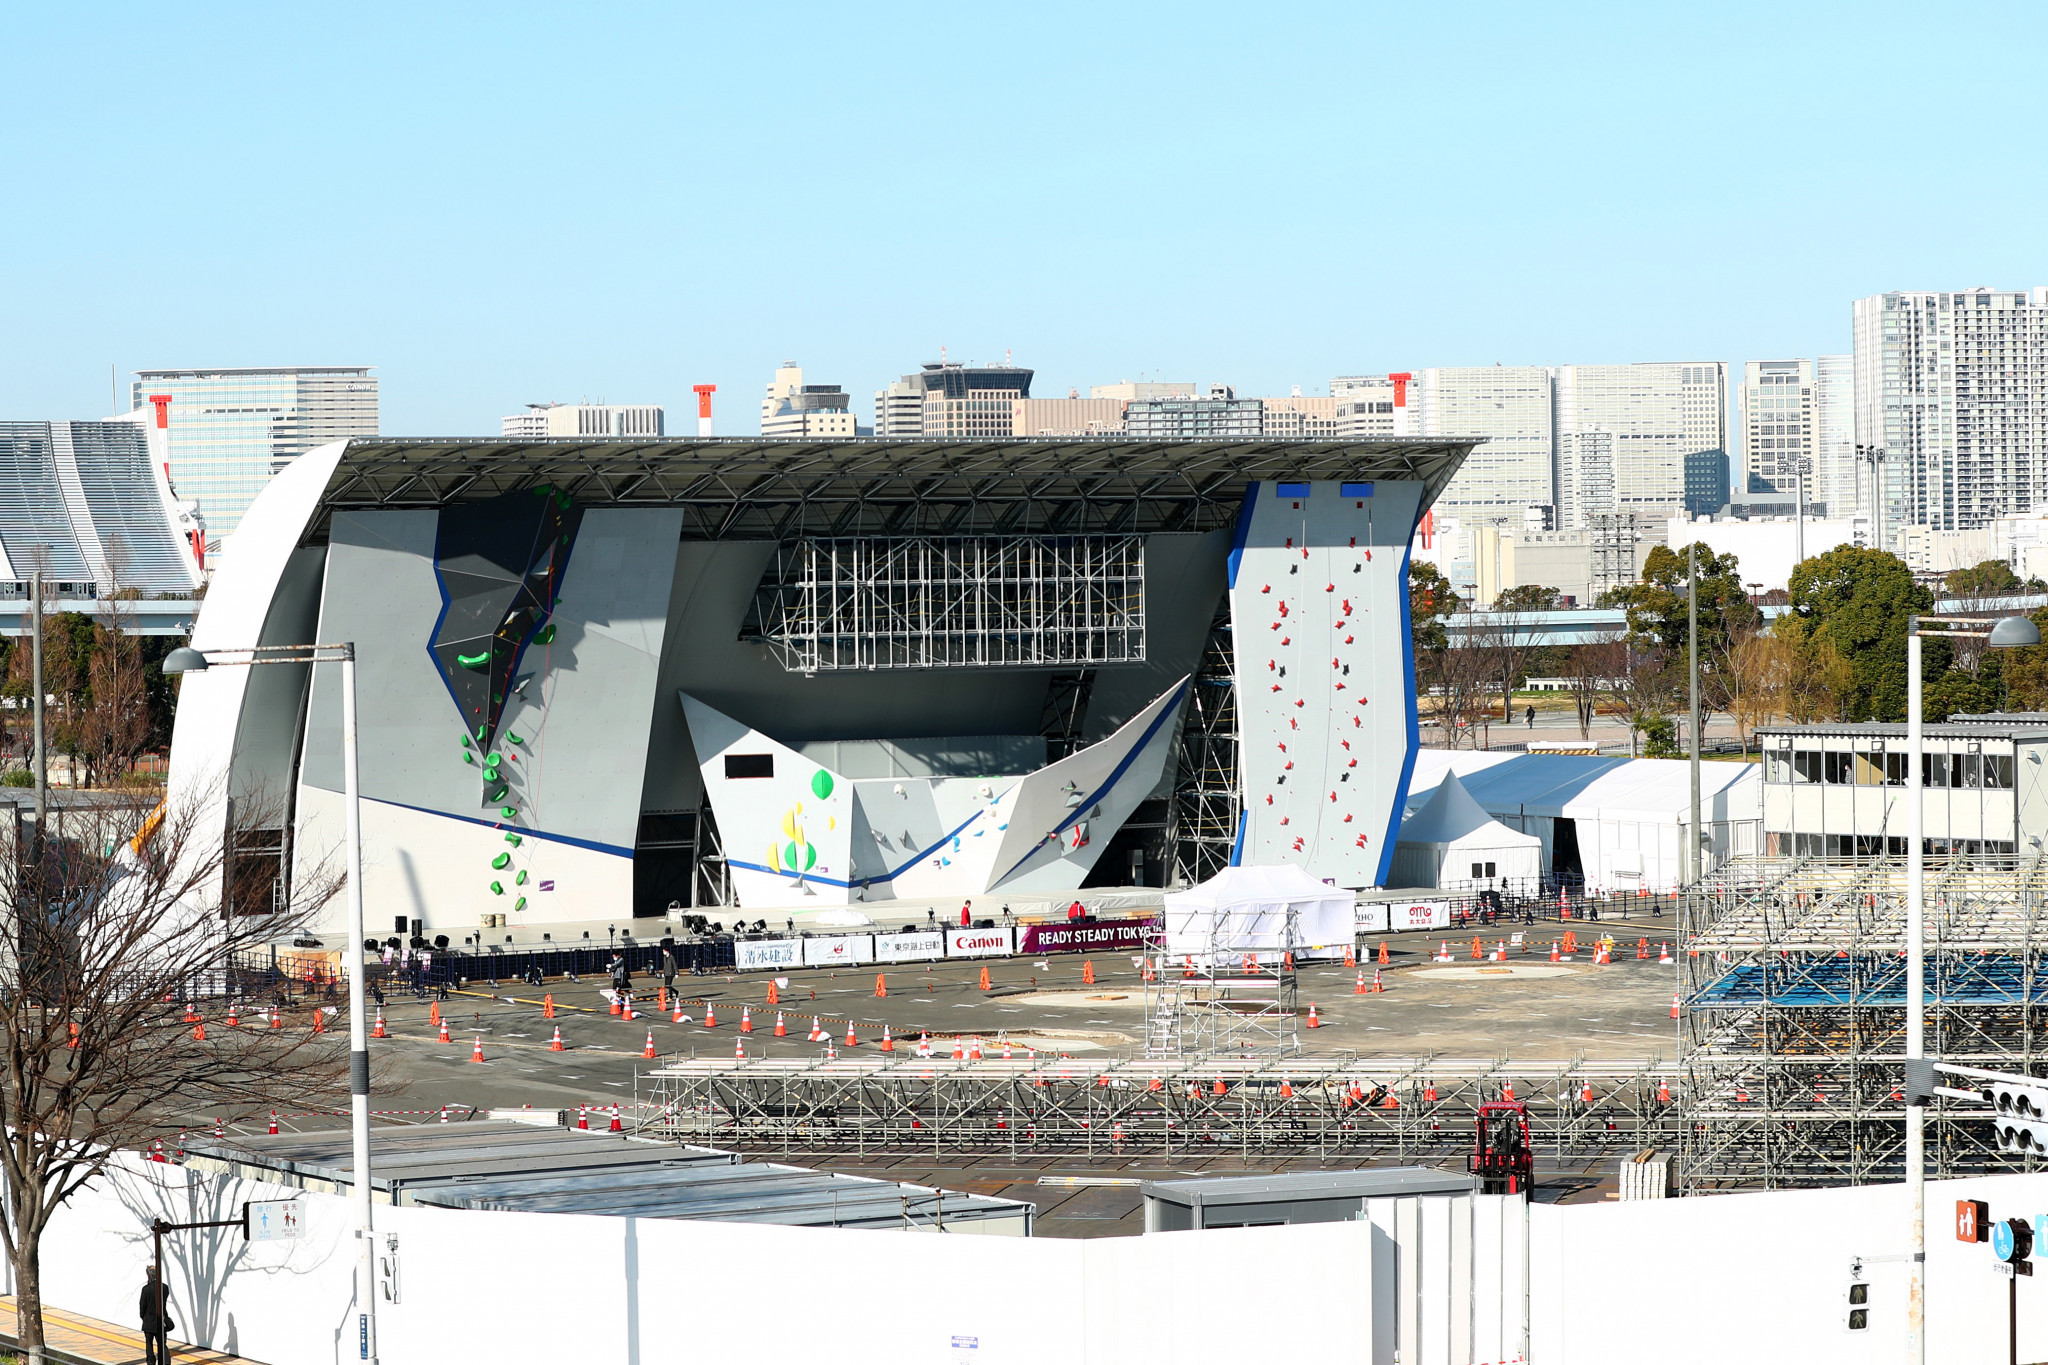 Tokyo 2020 take down temporary stands at Aomi Urban Sports Park